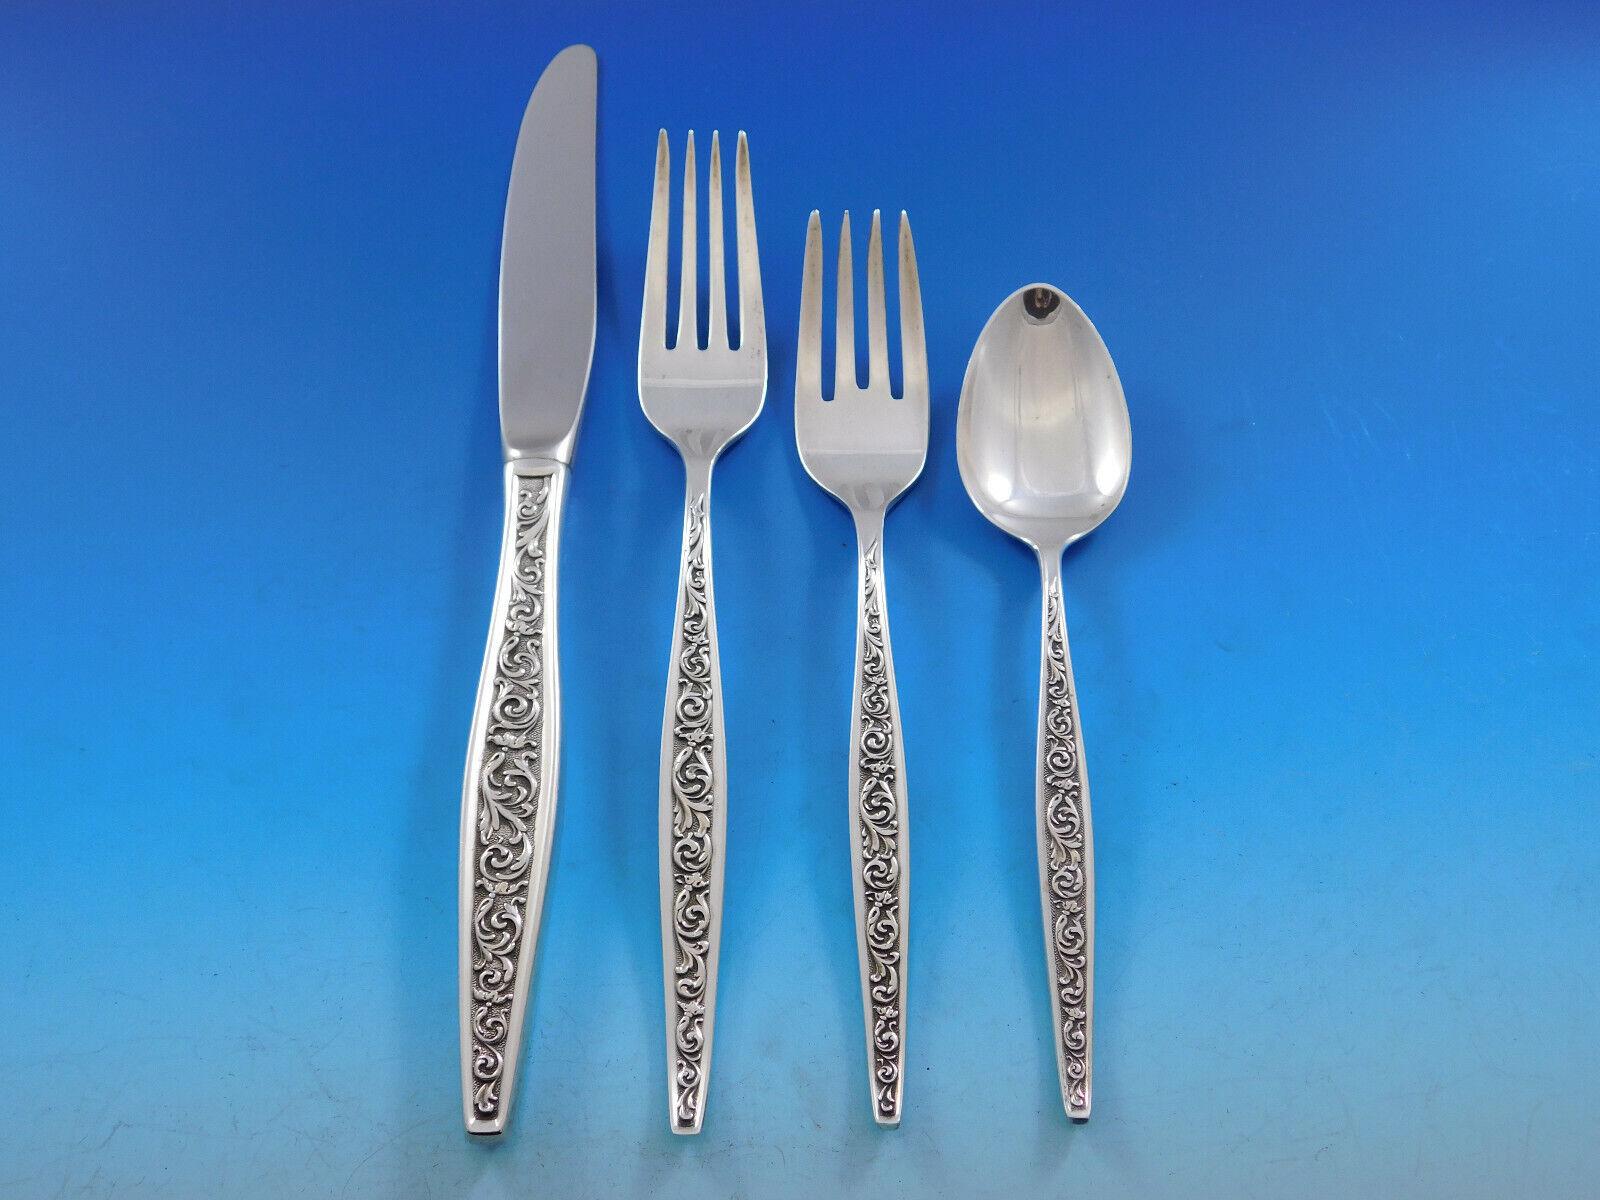 Renaissance Scroll by Reed and Barton, circa 1969, Sterling Silver Flatware set - 46 pieces. This set includes:

8 Knives, 9 1/8